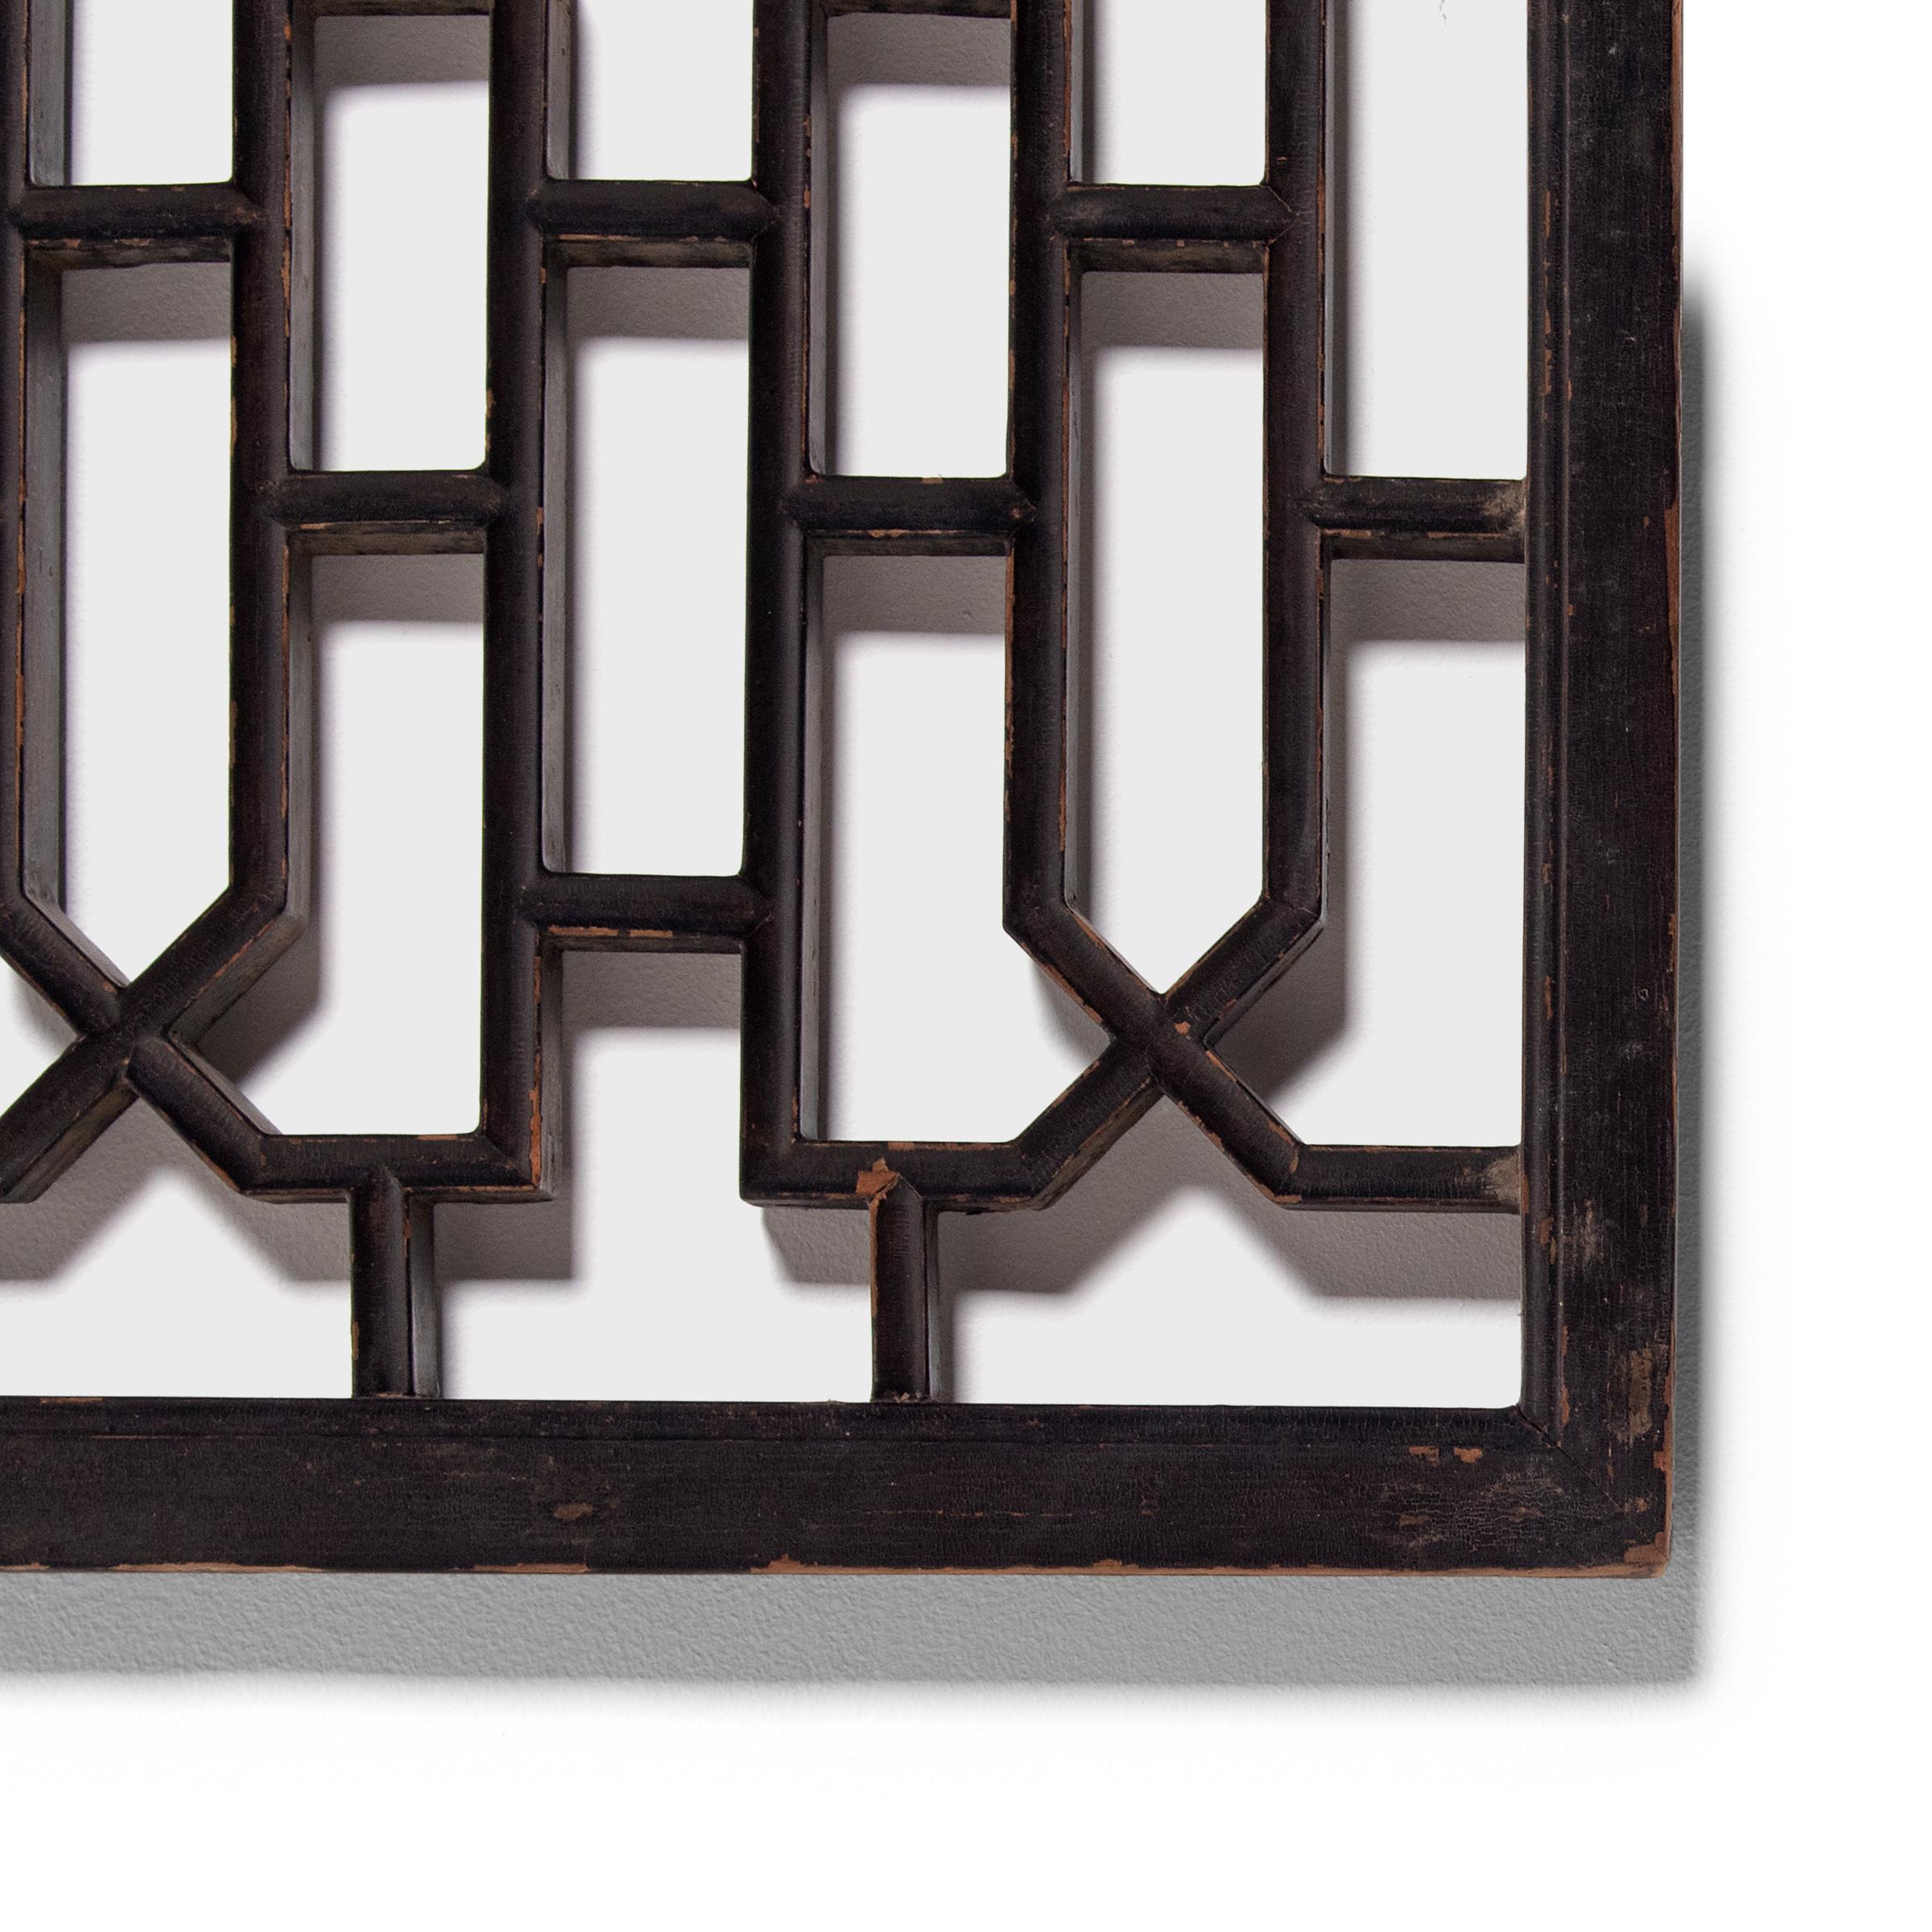 Lacquered Chinese Courtyard Lattice Panel, circa 1900